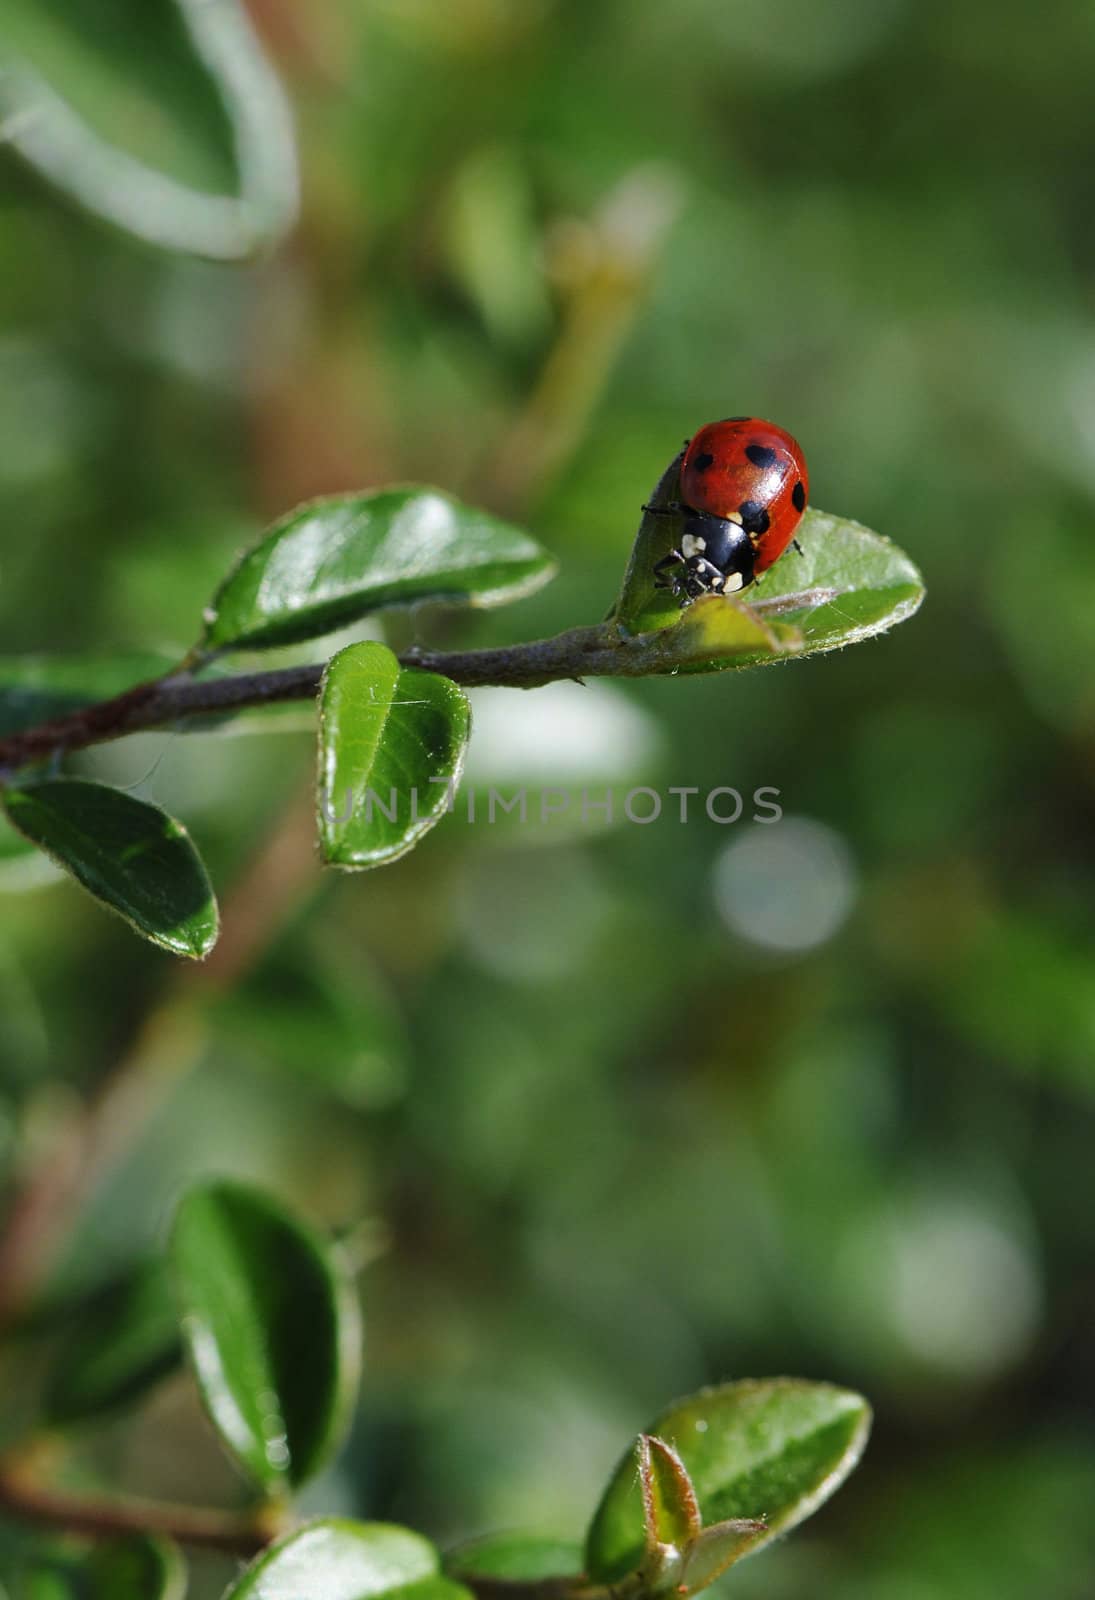 Red Ladybird on a Green Leaf by shkyo30